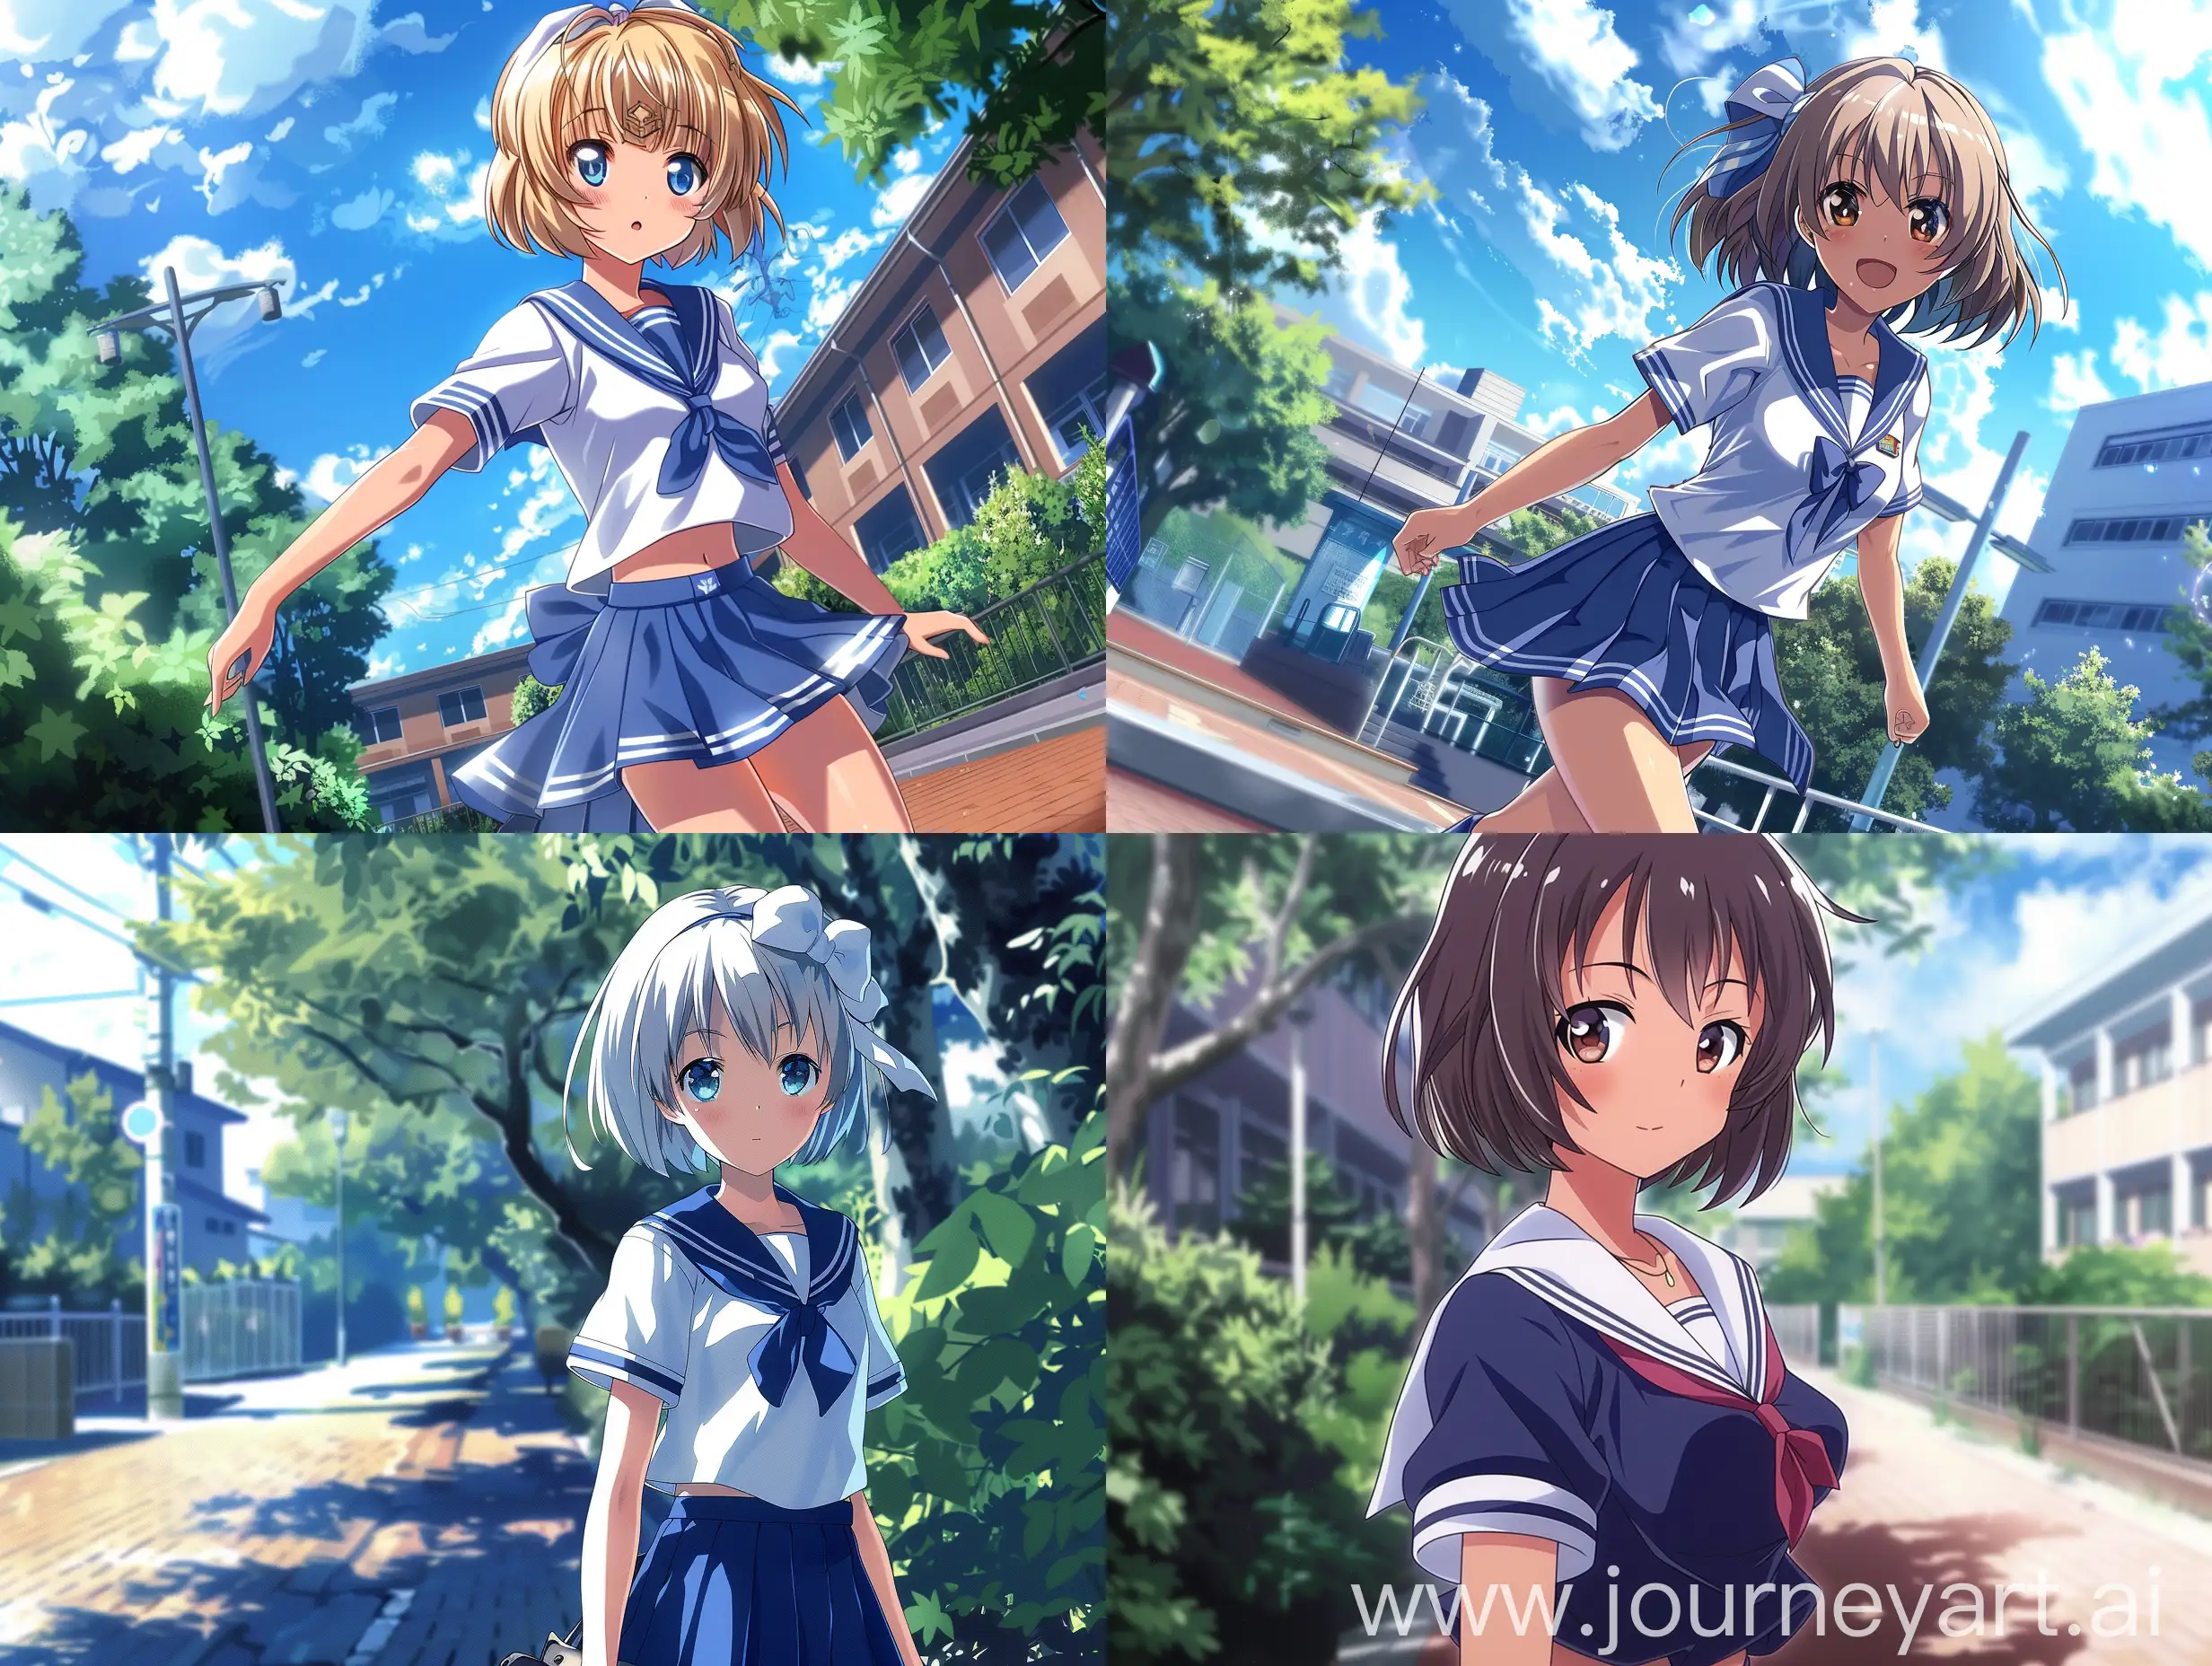 Youthful-Anime-High-School-Girl-in-Sailor-Suit-on-Campus